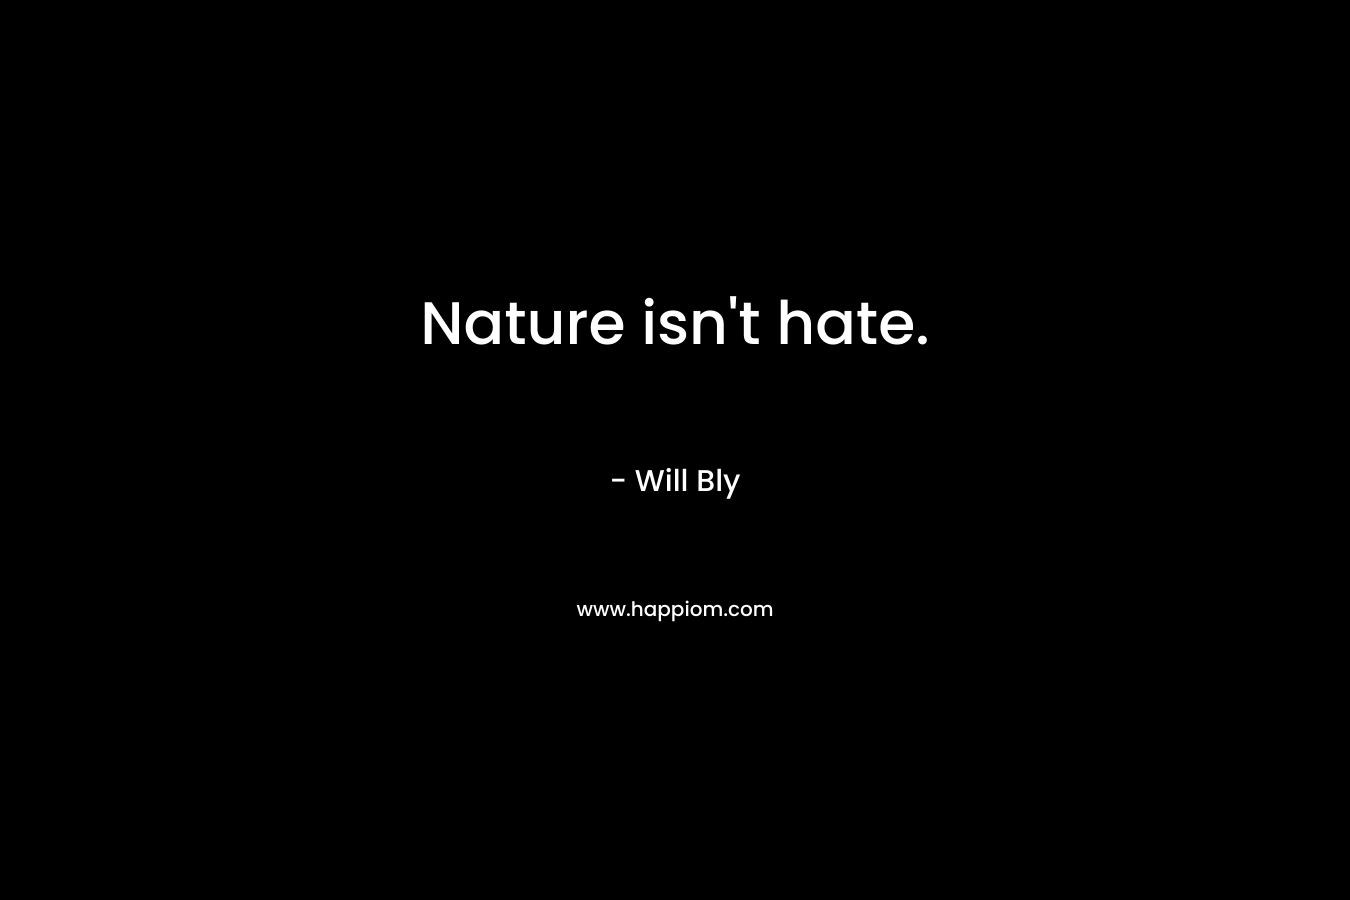 Nature isn't hate.